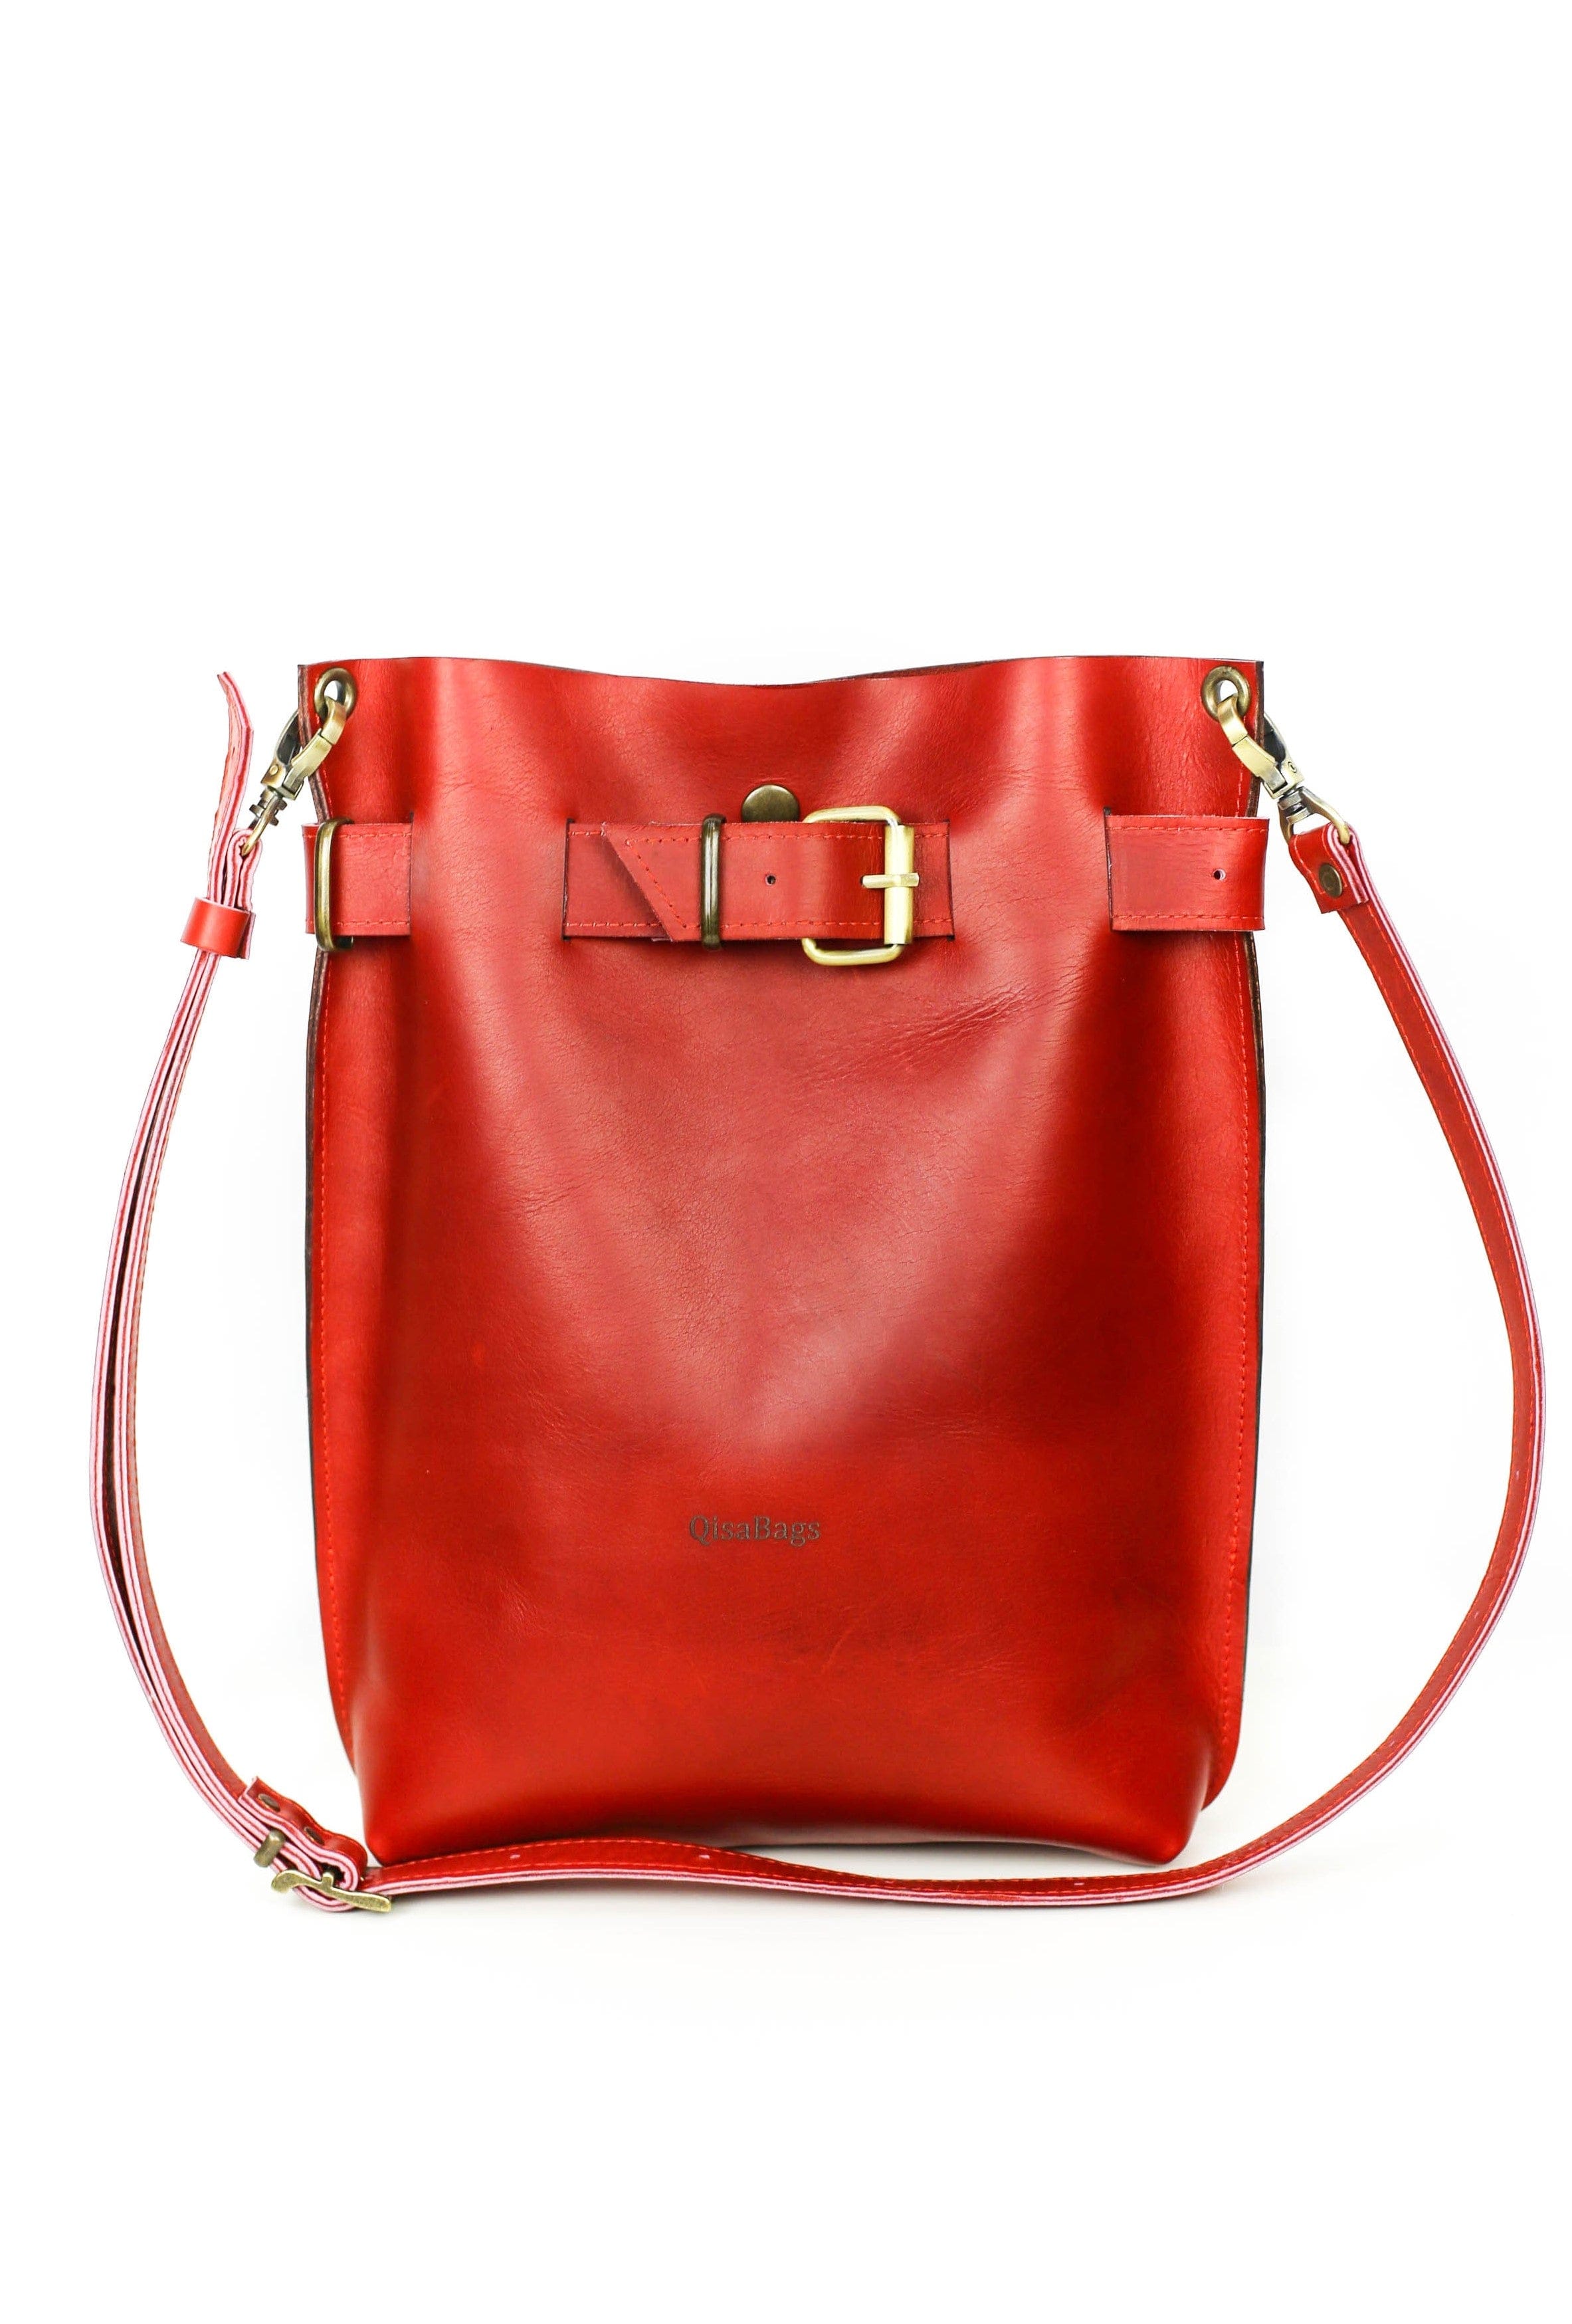 Kate Spade Morgan Bow Embellished Saffiano Leather Flap Chain Wallet in Red  | Lyst